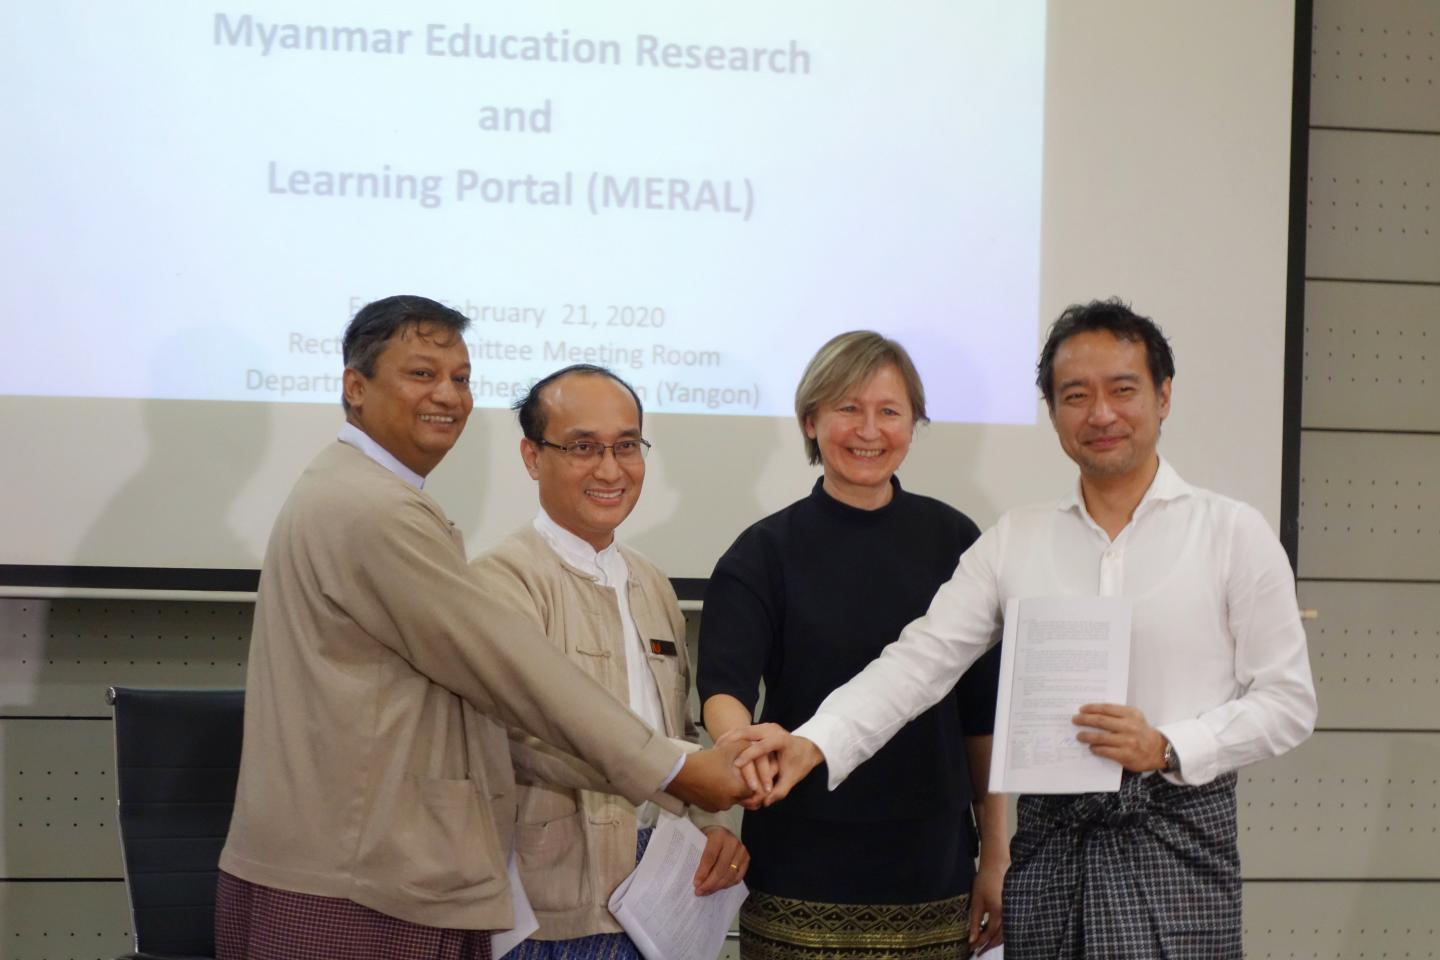 MERAL Signing Ceremony in 2020